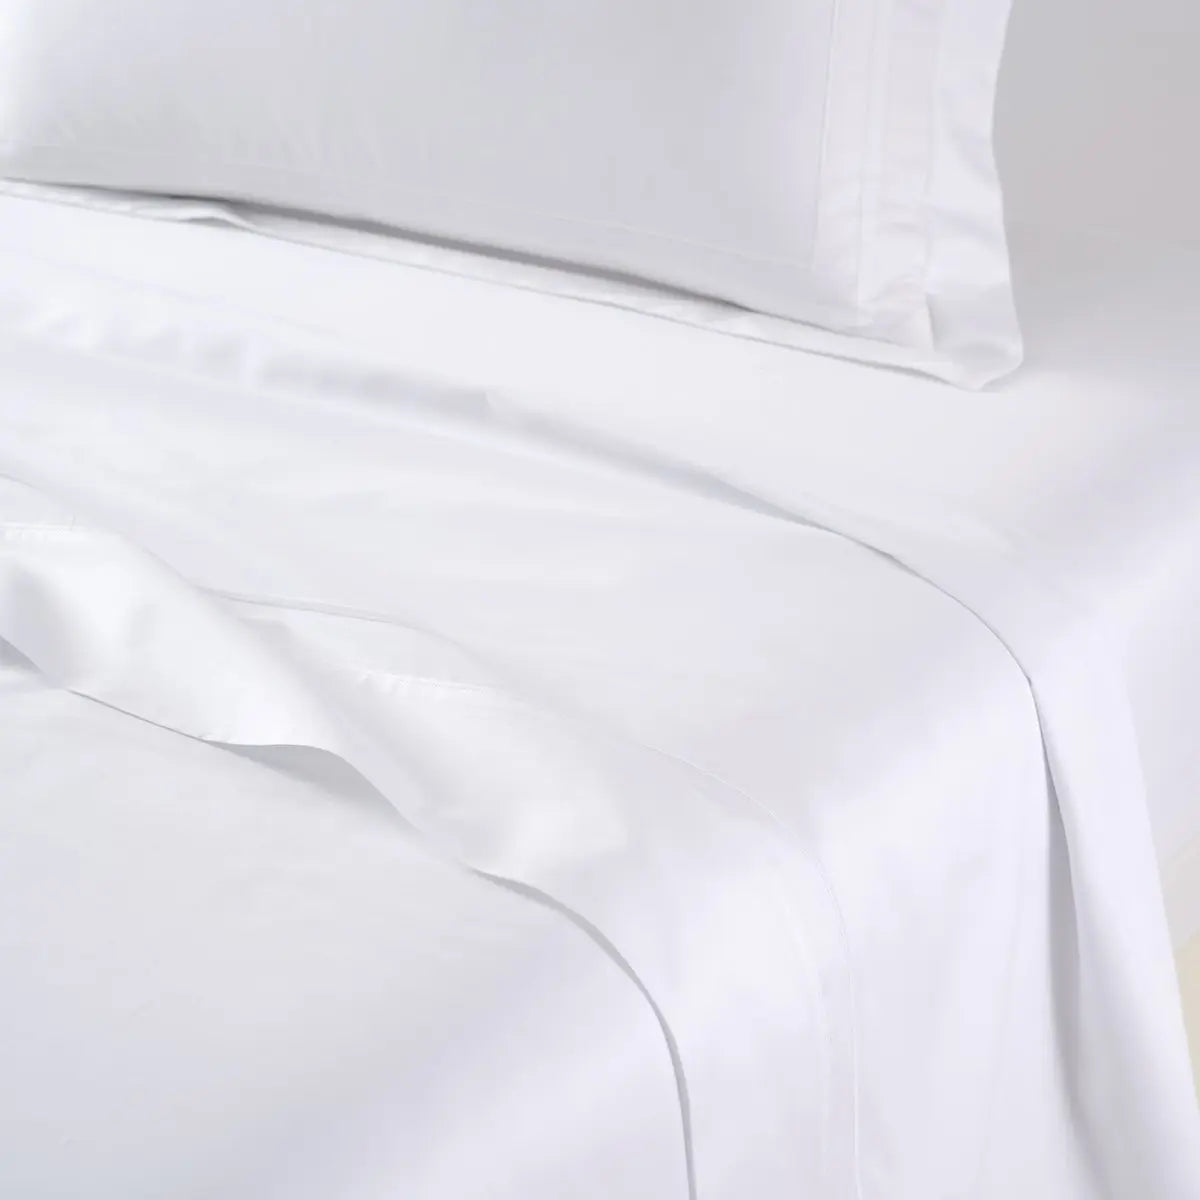 Yves Delorme Lutece Flat Sheet in Blanc on a bed